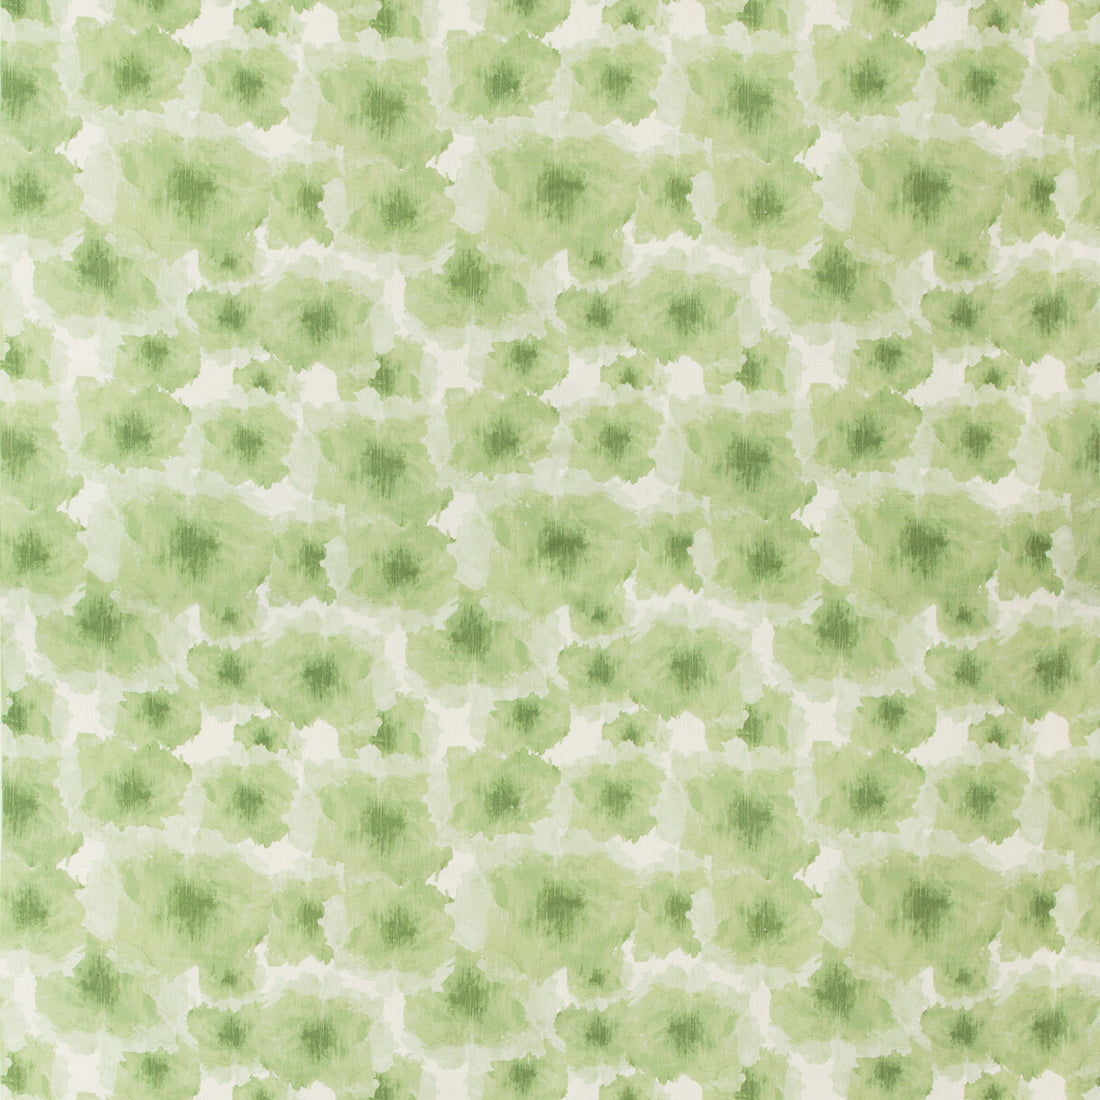 Manders fabric in jade color - pattern MANDERS.3.0 - by Kravet Design in the Barry Lantz Canvas To Cloth collection